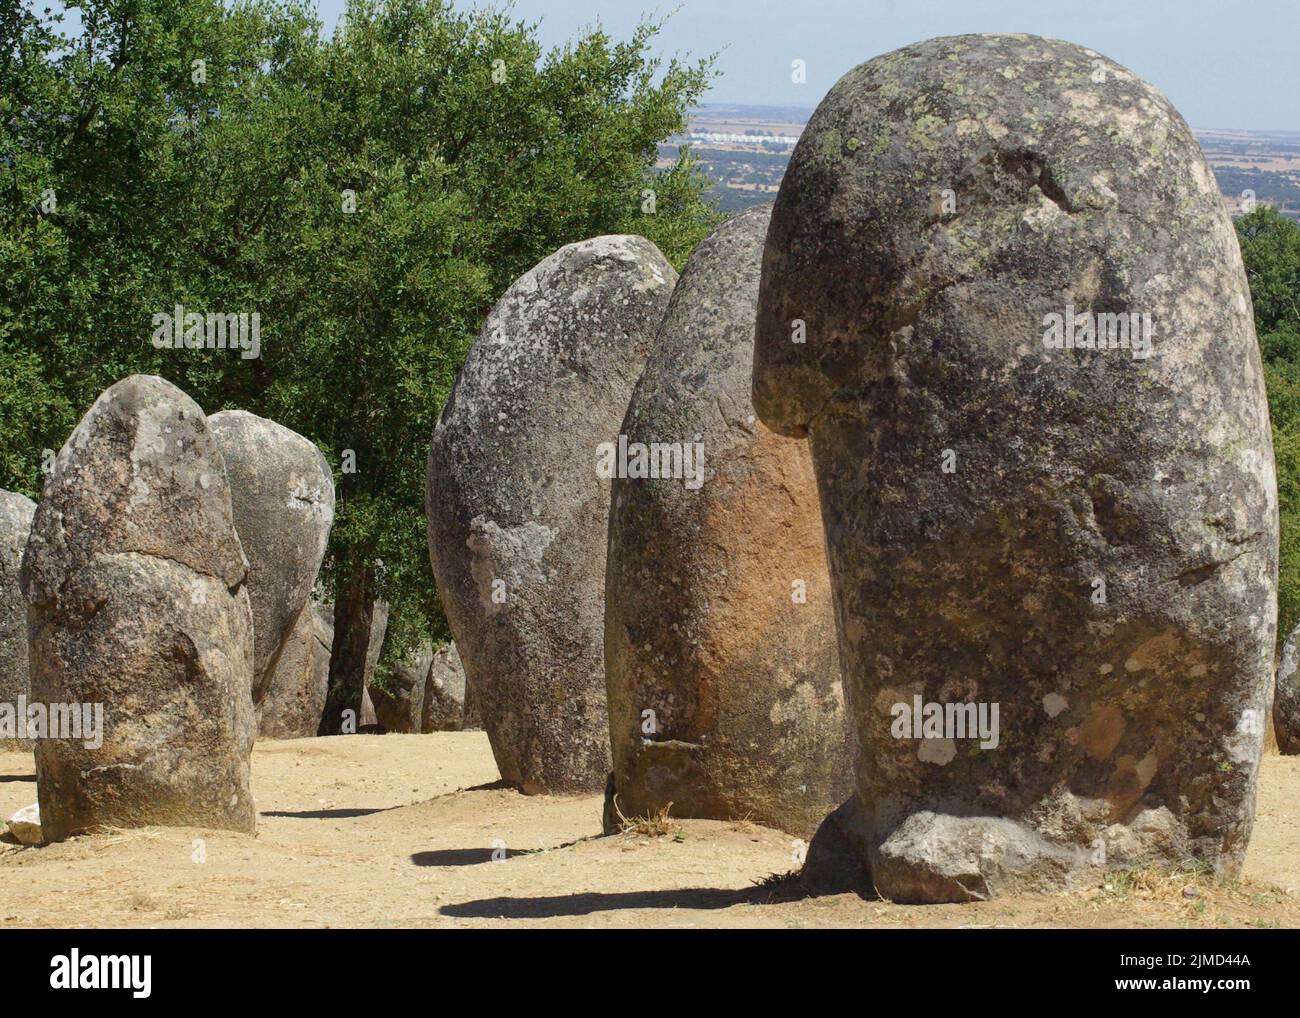 European megaliths cast shadows at neolithic site. Stock Photo